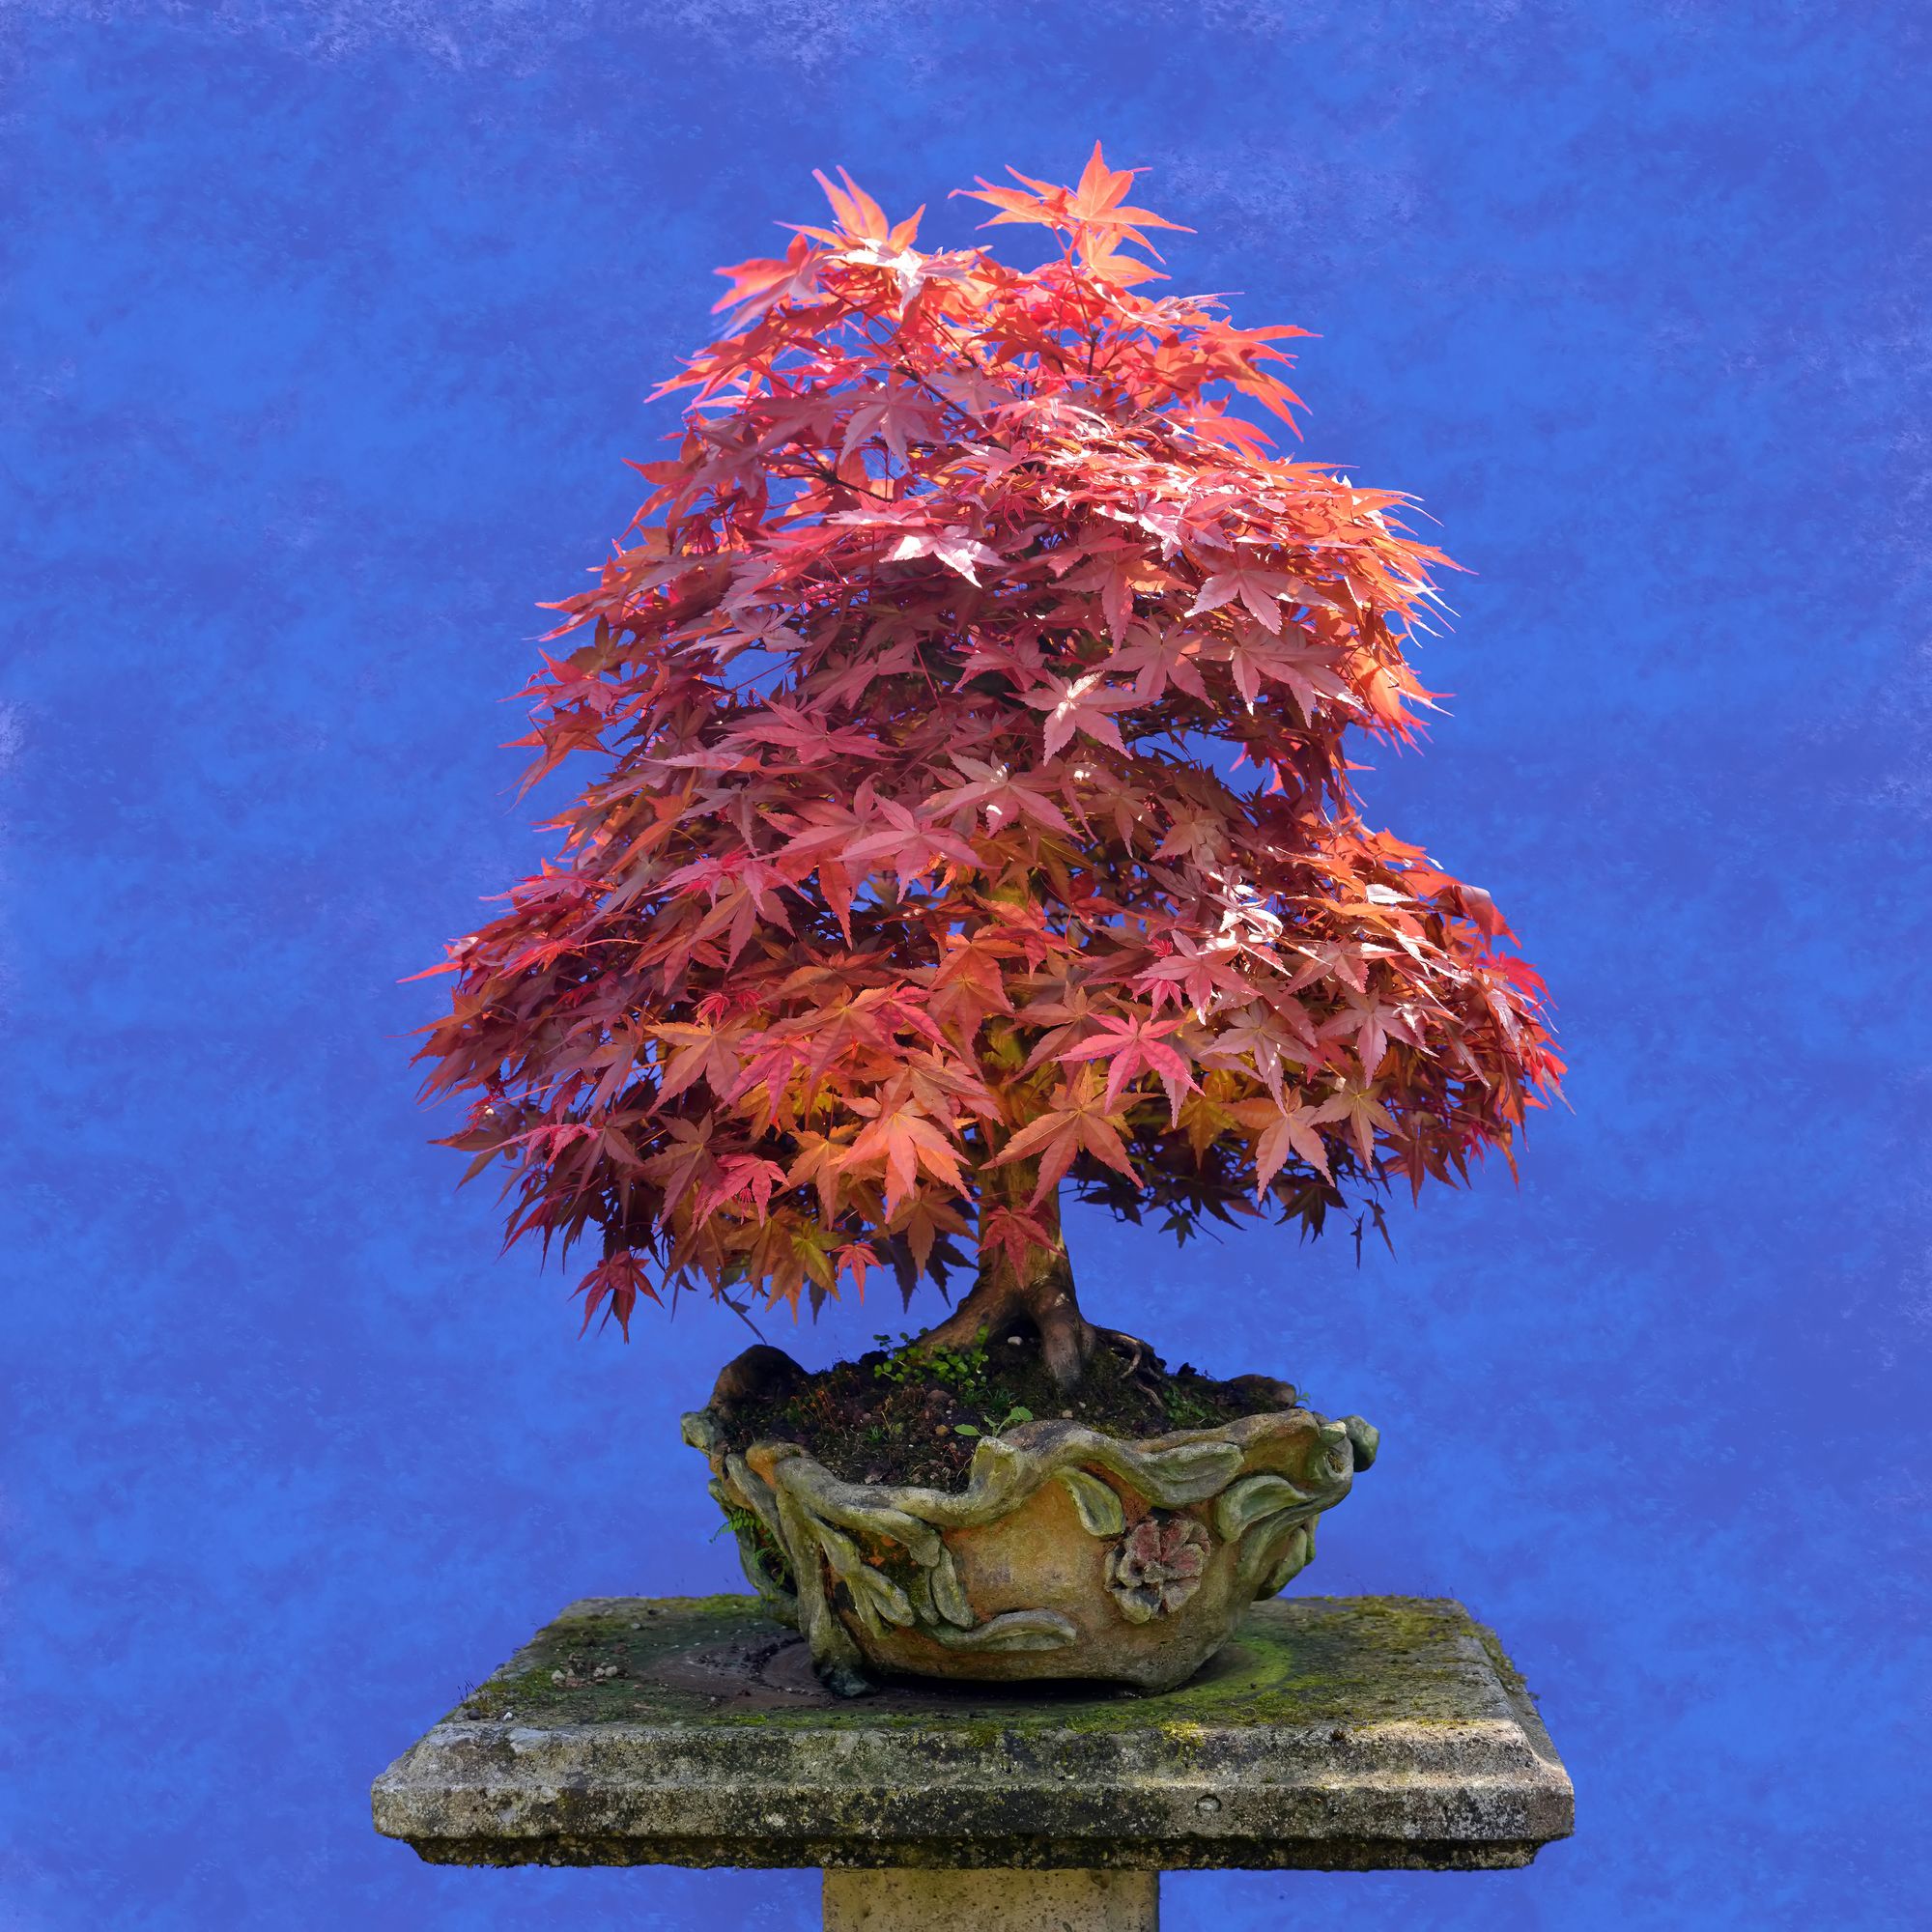 Maple bonsai tree planted in an old pot placed in a cemented platform